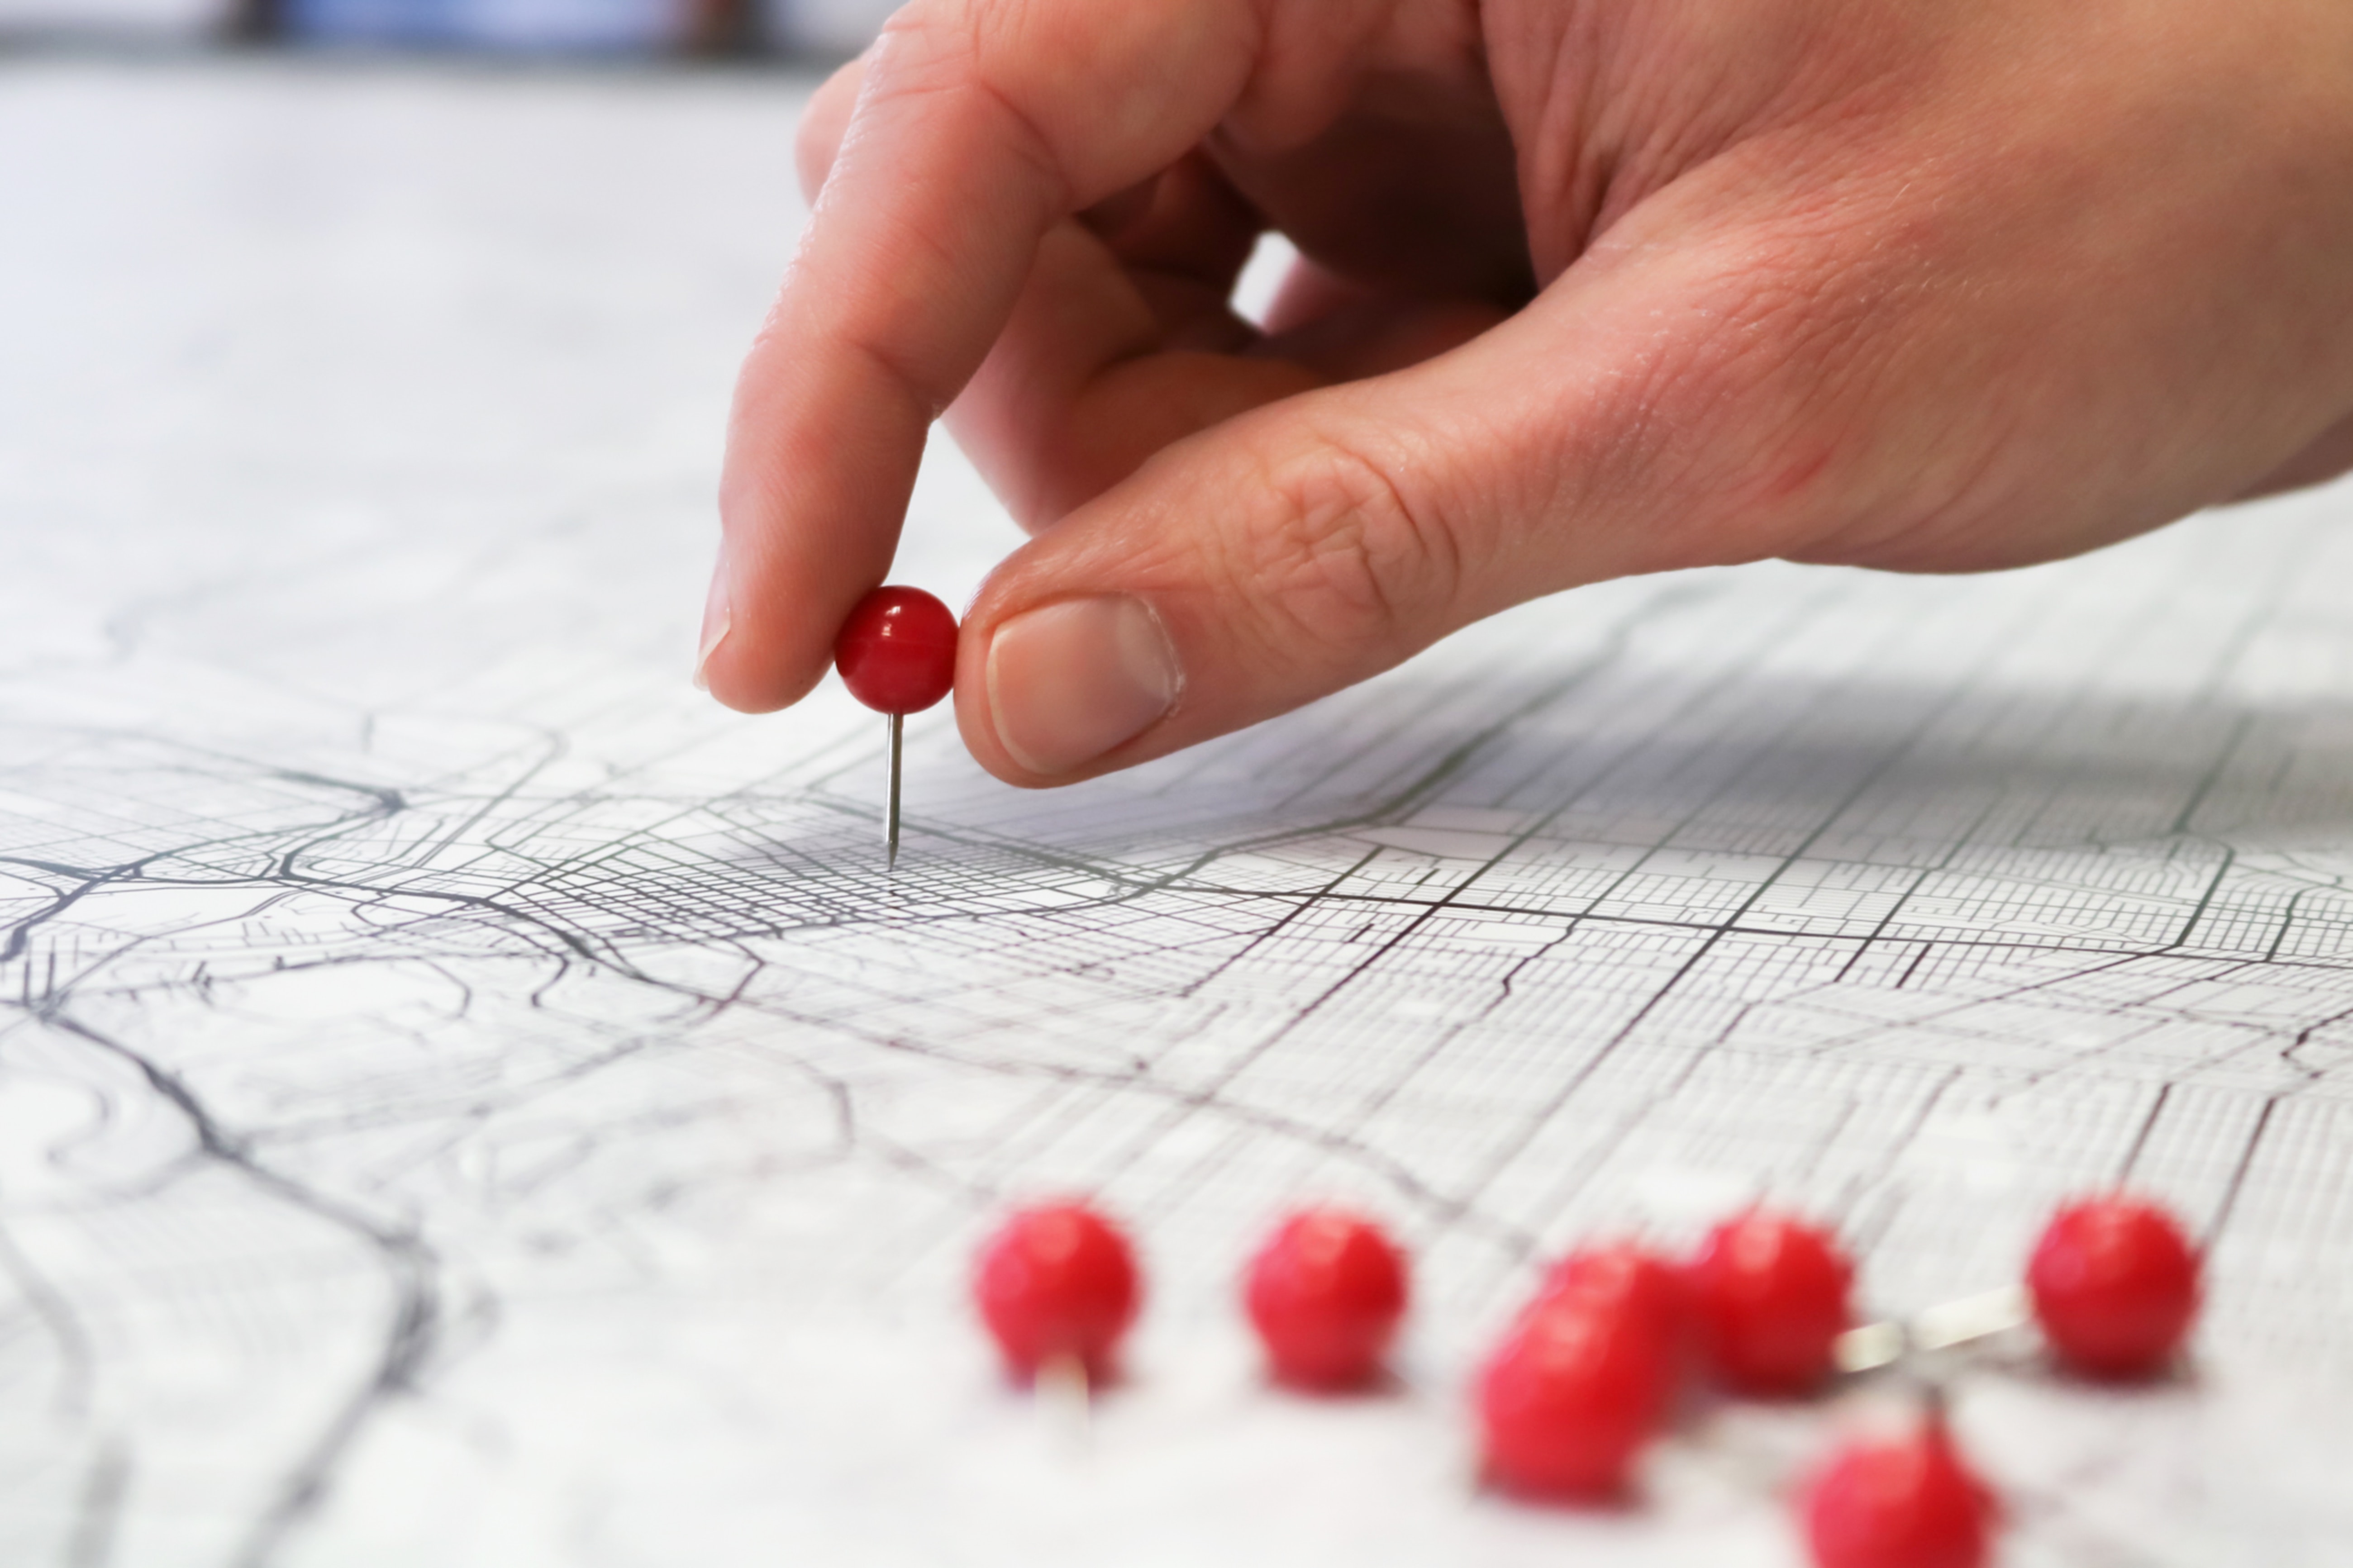 Image of person using a pin to mark a location on a map